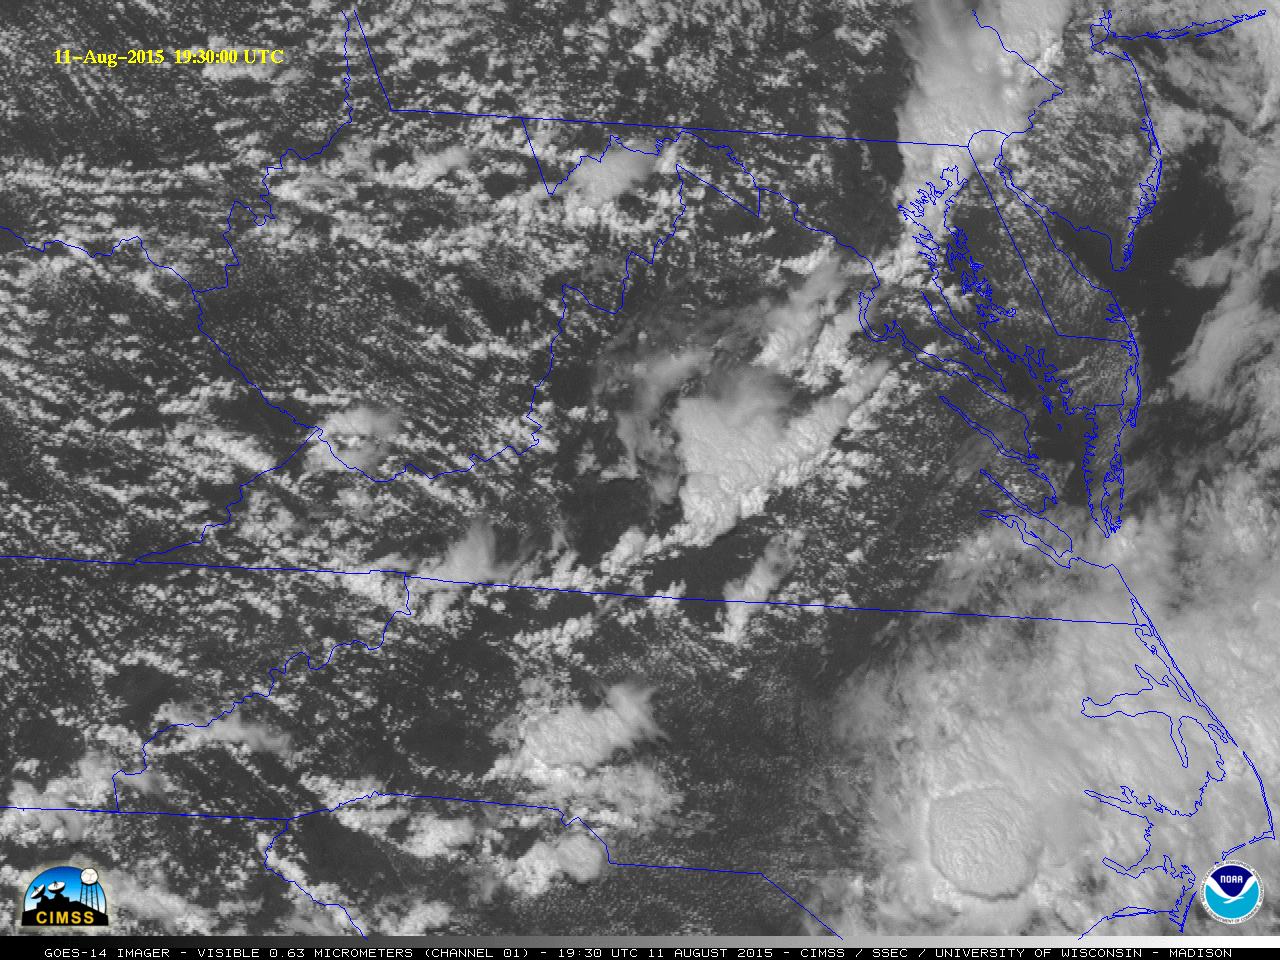 GOES-14 visible (0.63 µm) images [click to play MP4 animation]